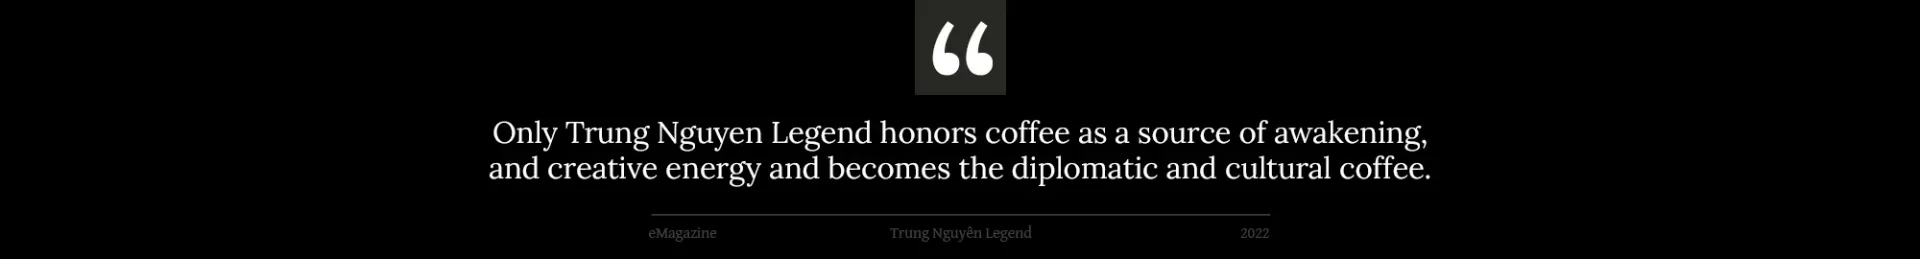 Only Trung Nguyen Legend honors coffee as a source of awakening, and creative energy and becomes the diplomatic and cultural coffee.